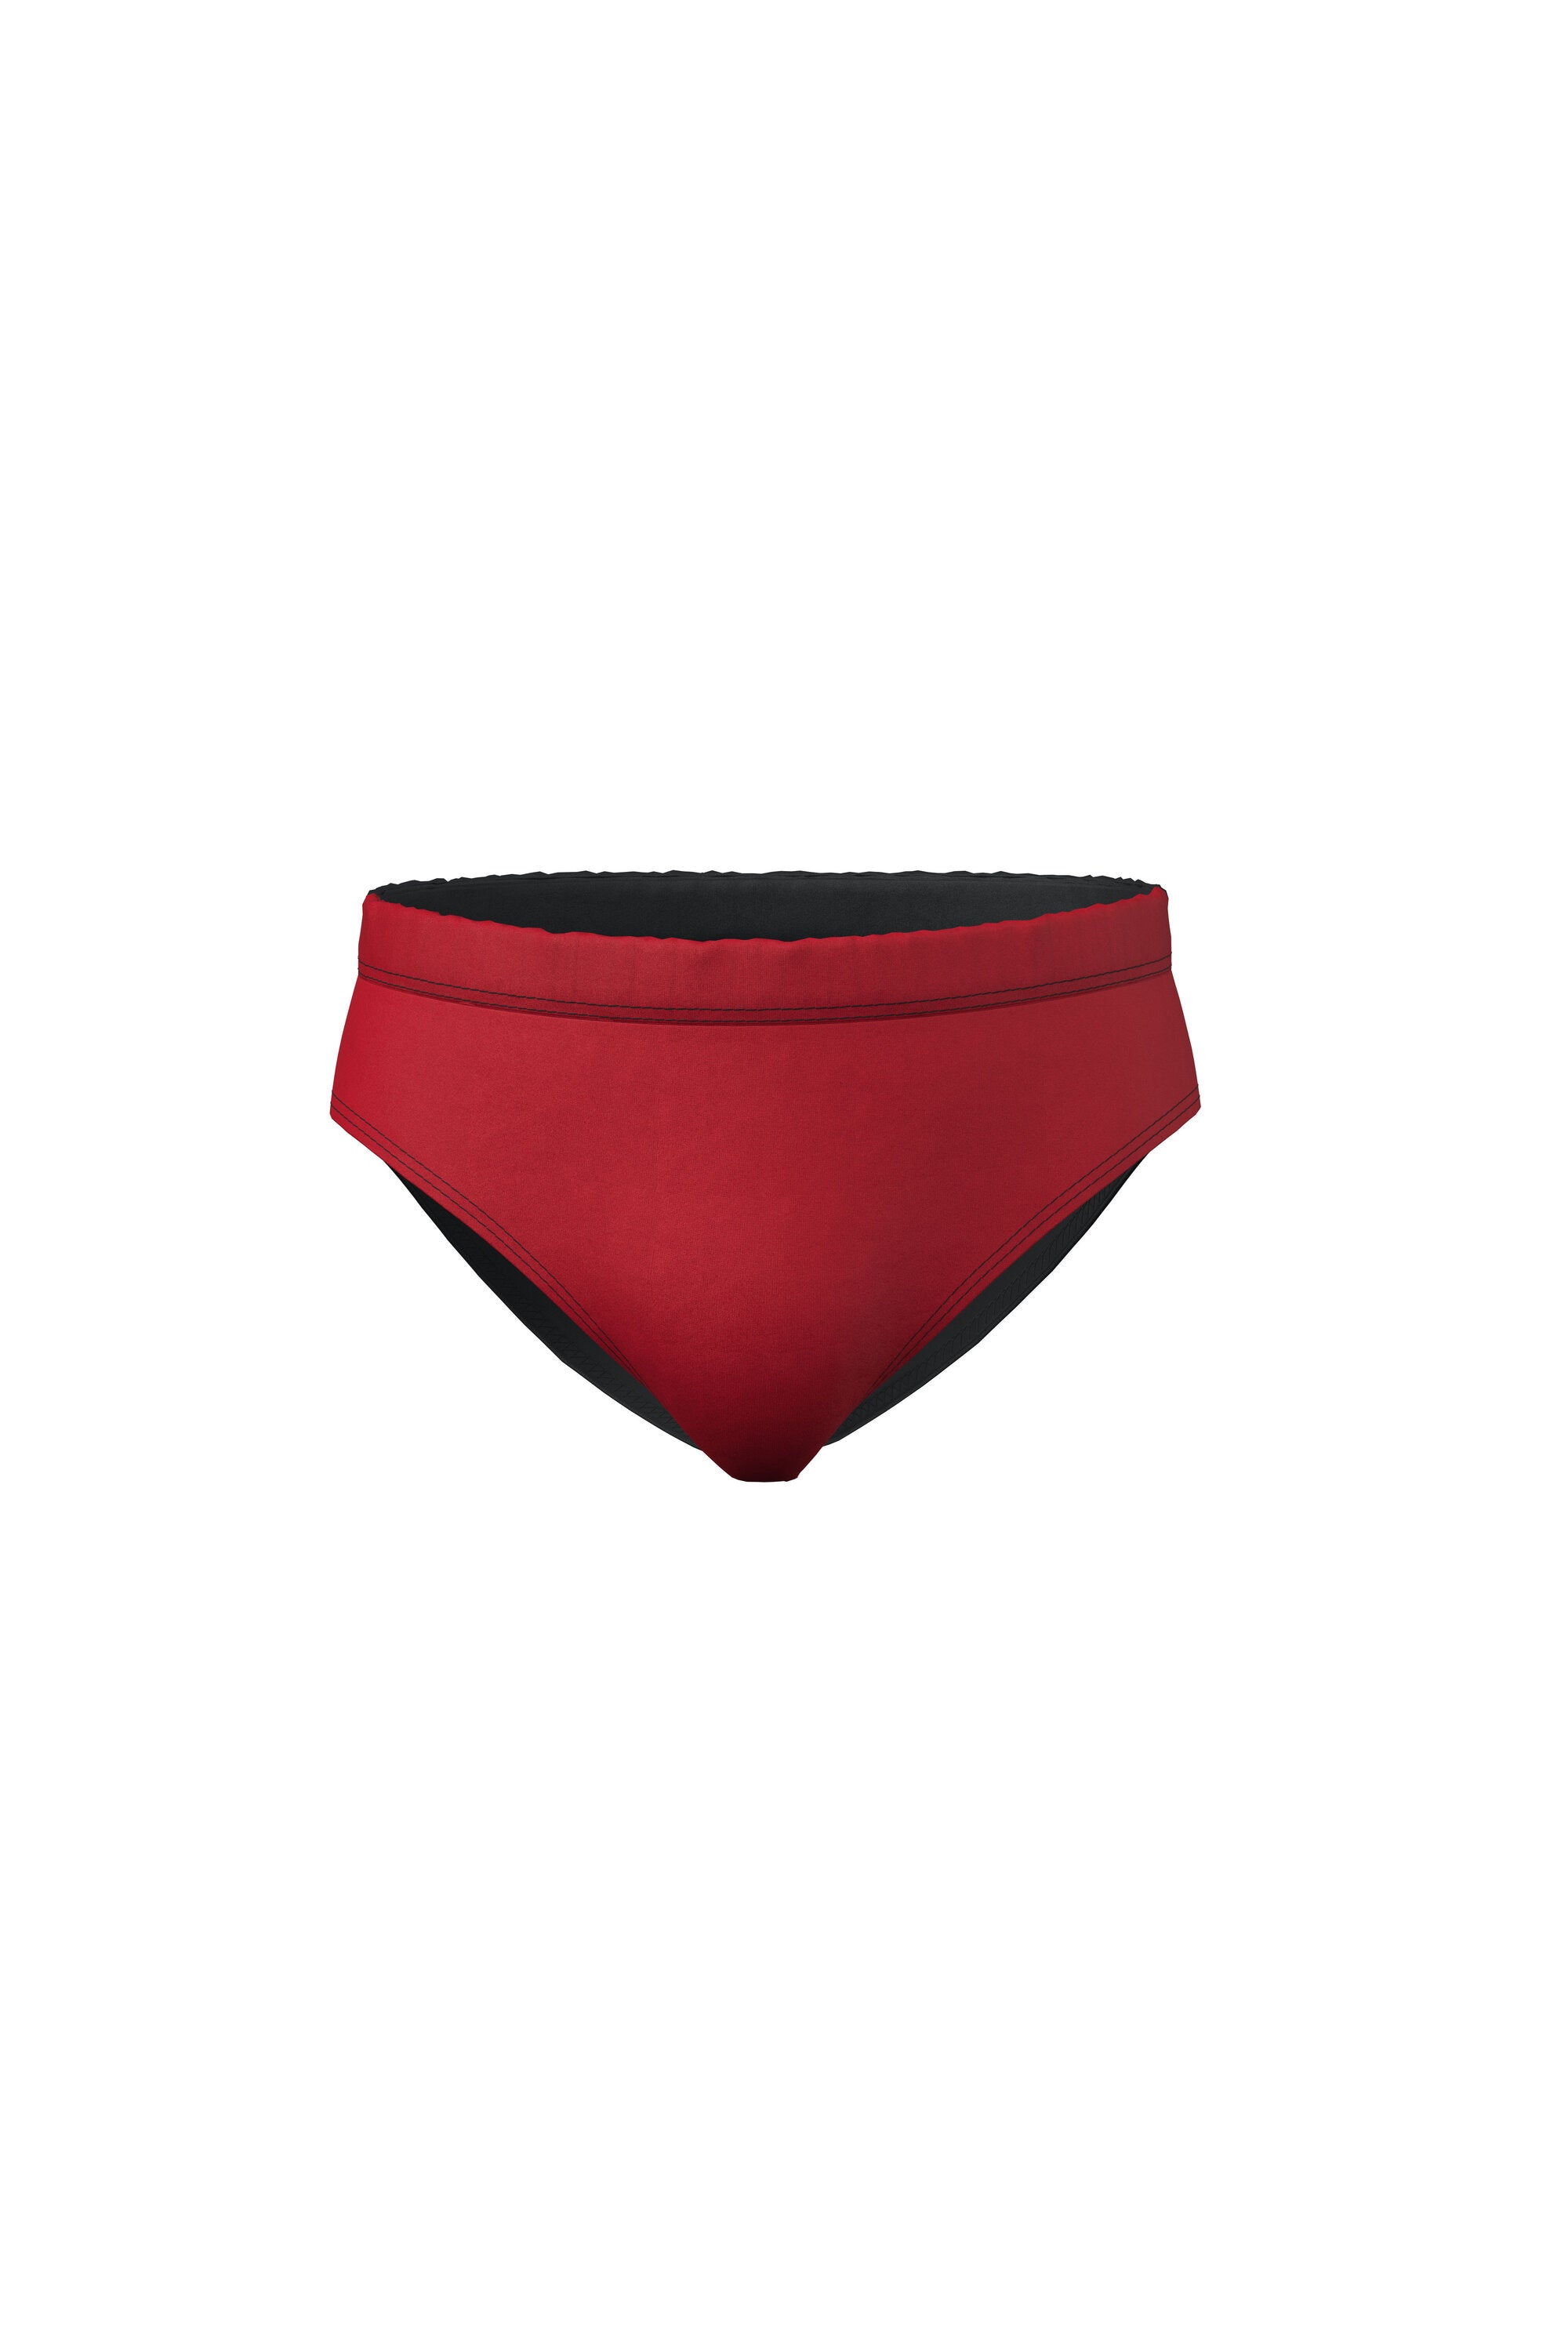 Red lycra brief costume with writing